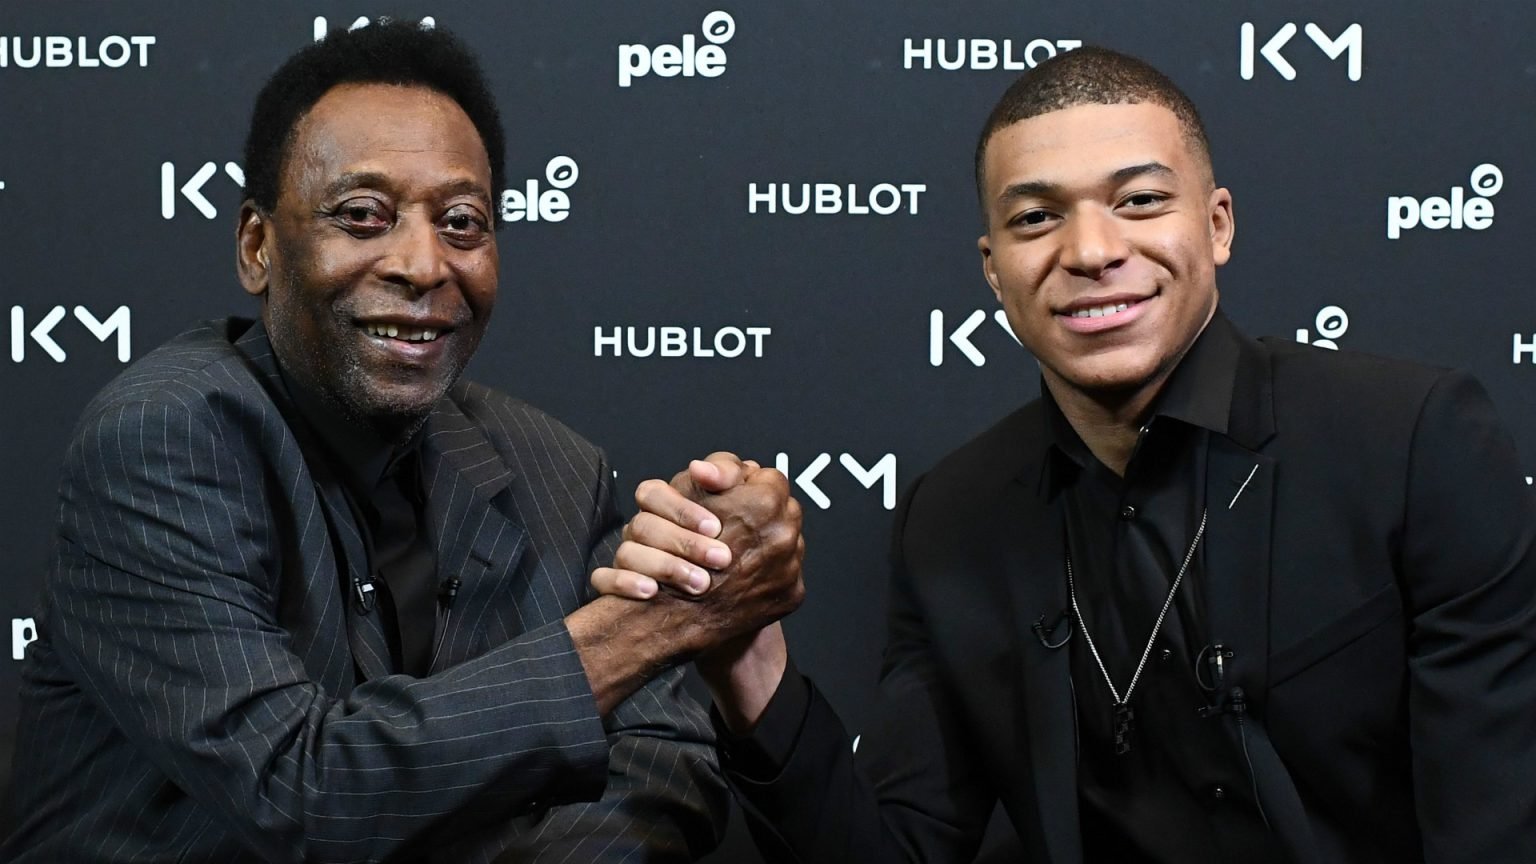 b24f89f90424acd333bcb554c7e32243561f6c1c 1536x864 1 Can Kylian Mbappe win more World Cup titles than Pele?